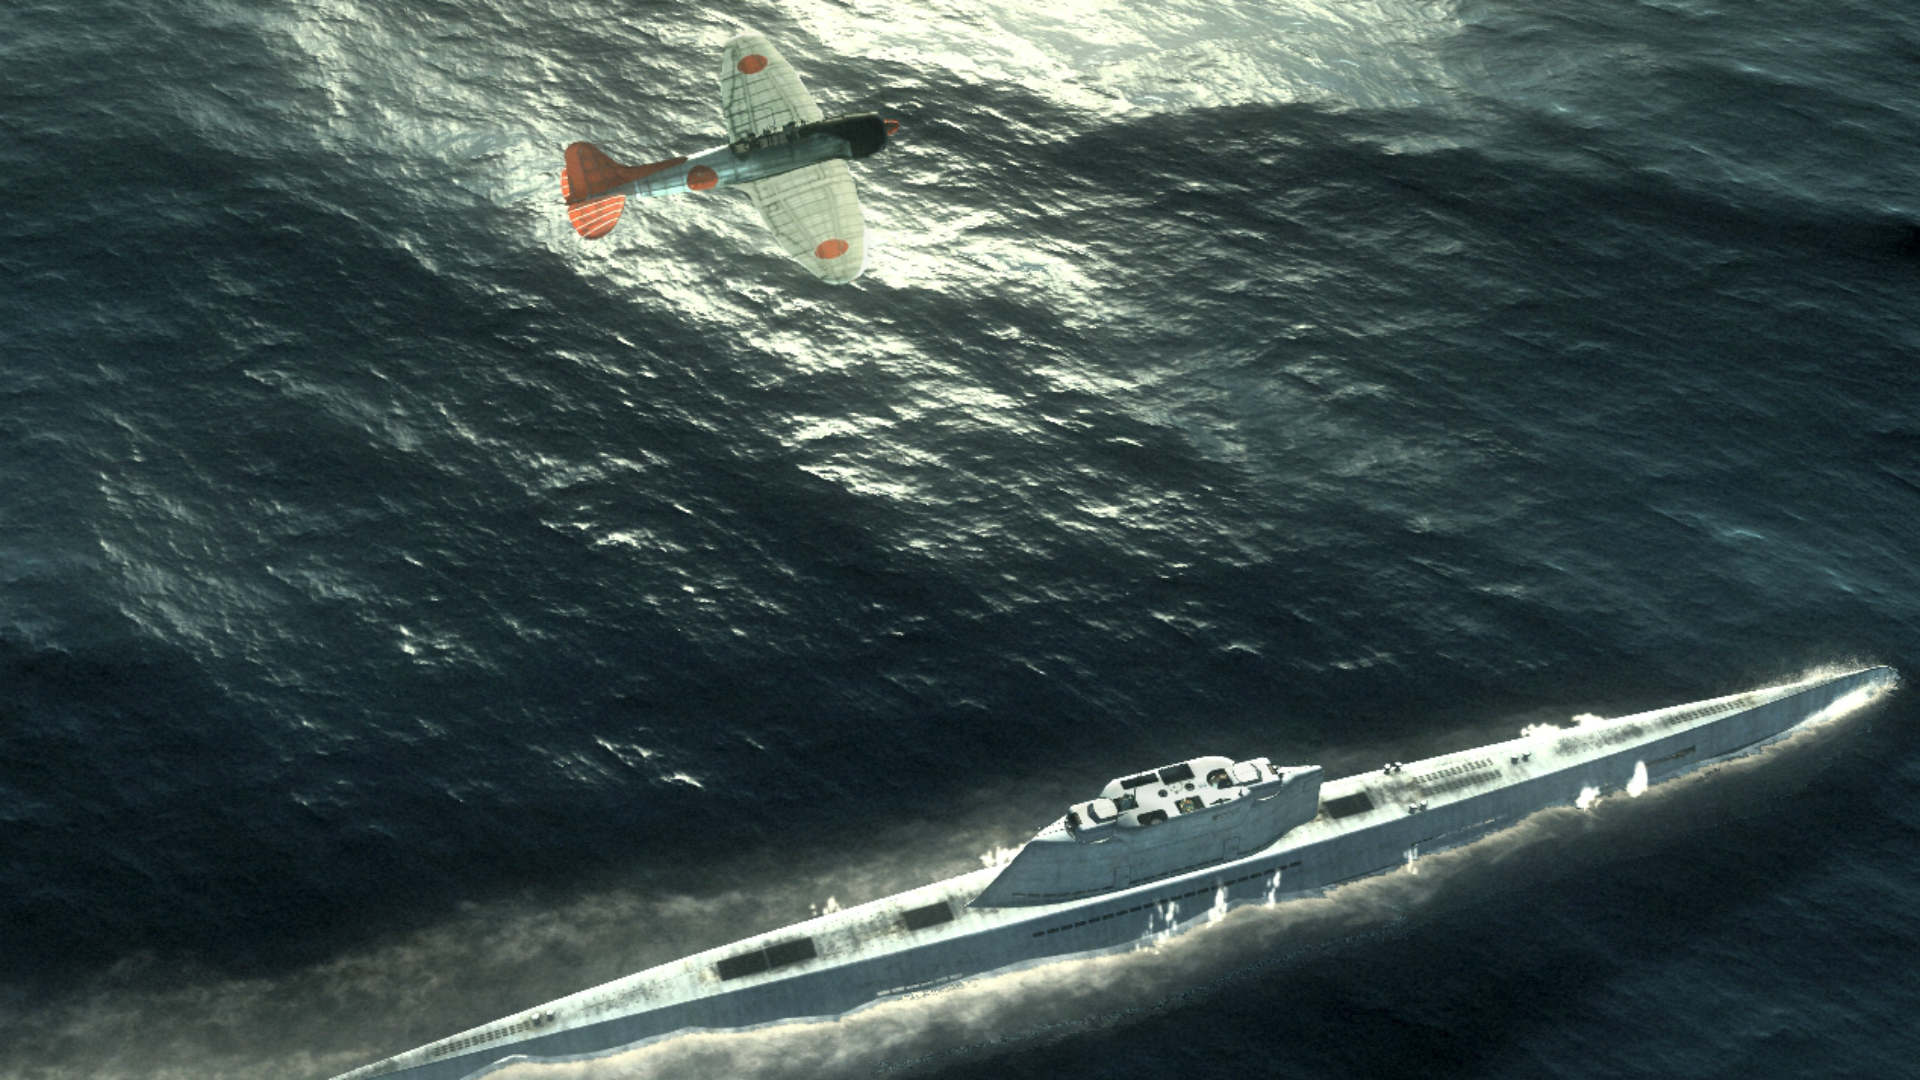 Best simulation games: Silent Hunter: Wolves of the Pacific. Image shows a boat and a plane at sea.